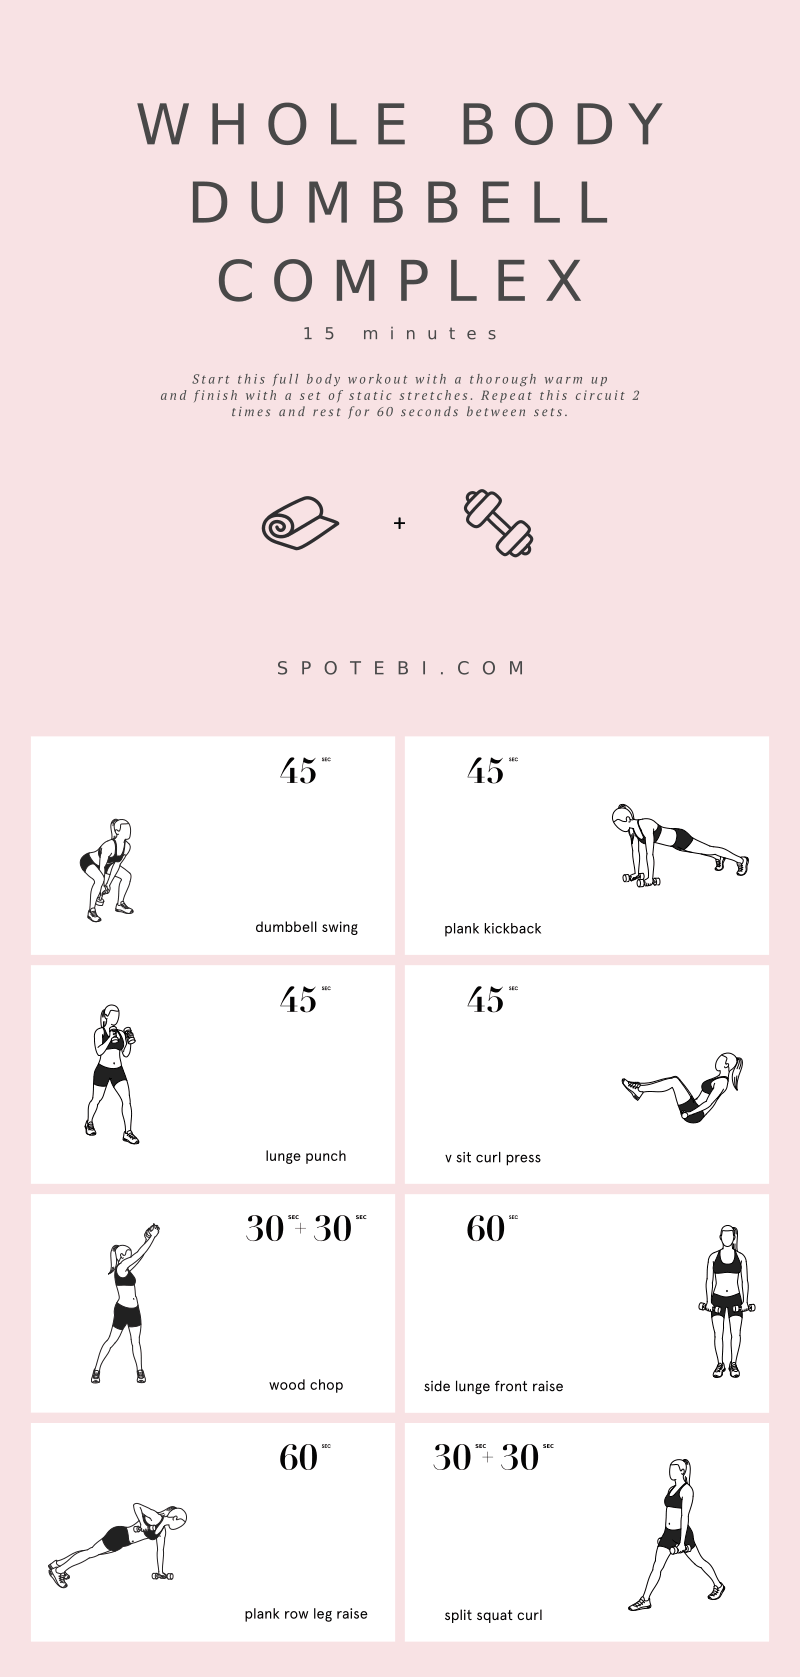 A set of dumbbells is all you need to complete this 15-minute whole body dumbbell complex. Give it all you got, and remember that every workout counts! https://www.spotebi.com/workout-routines/15-minute-whole-body-dumbbell-complex/